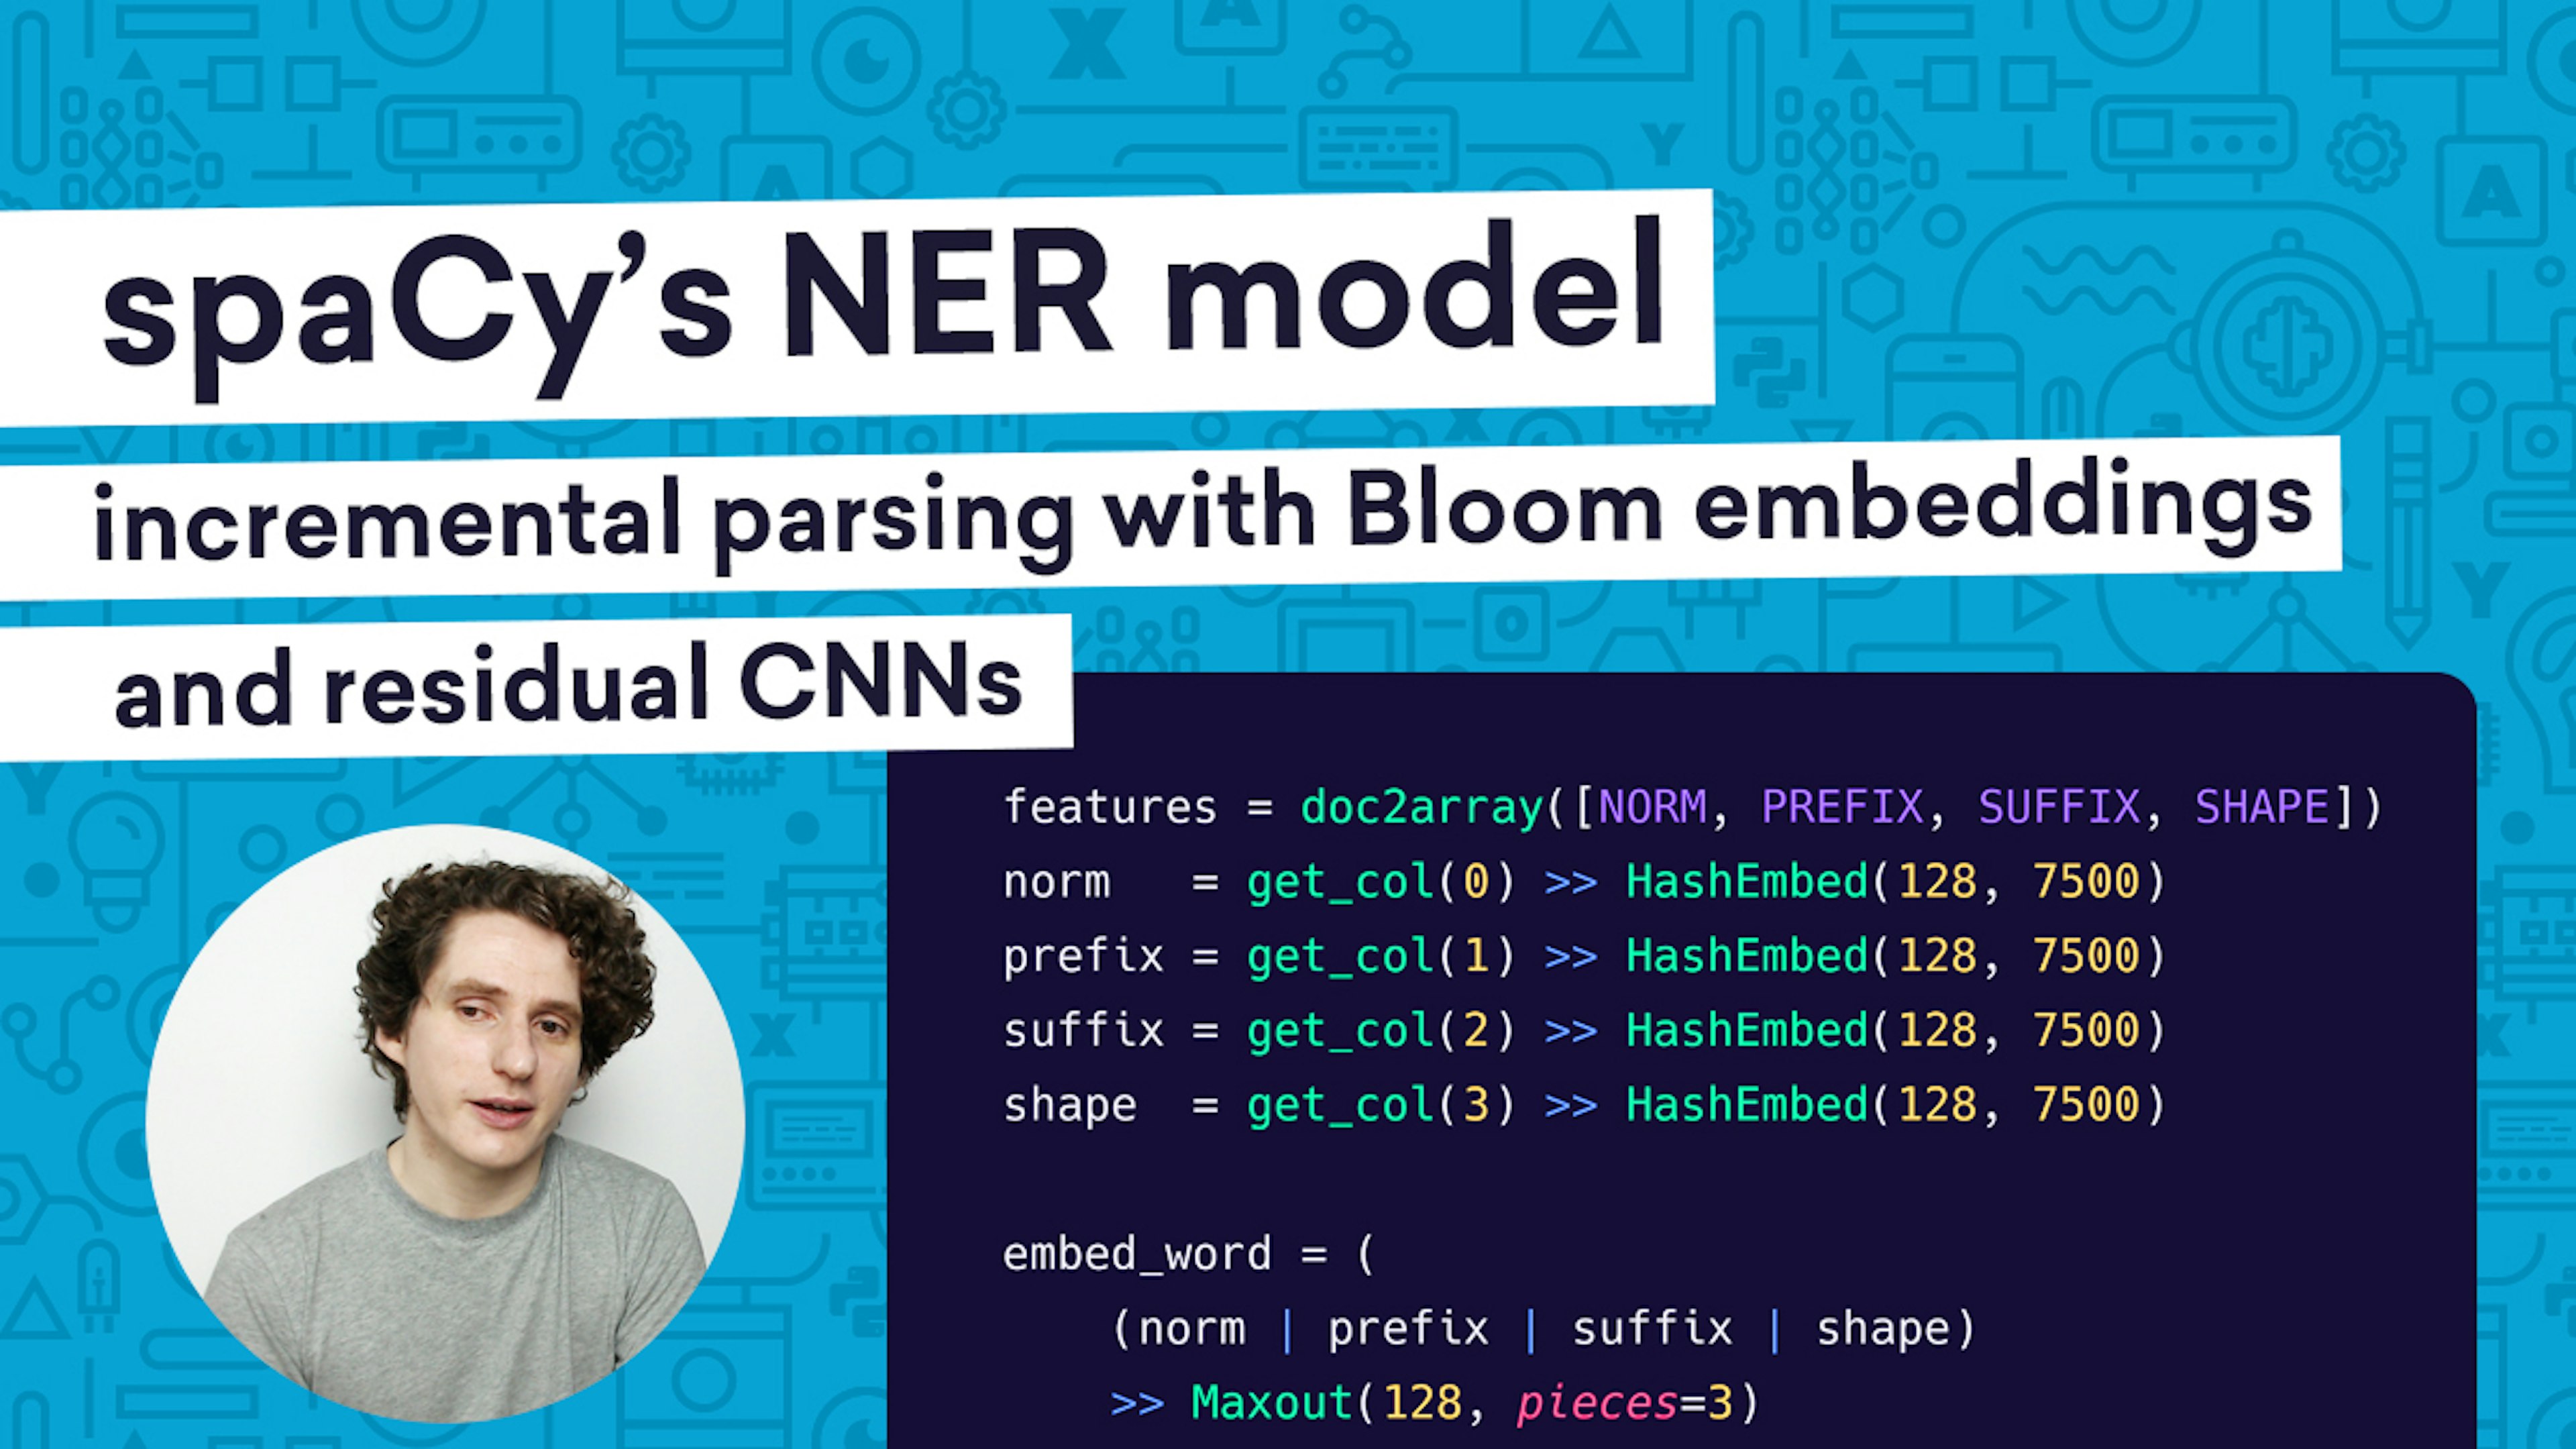 spaCy’s entity recognition model: incremental parsing with Bloom embeddings & residual CNNs